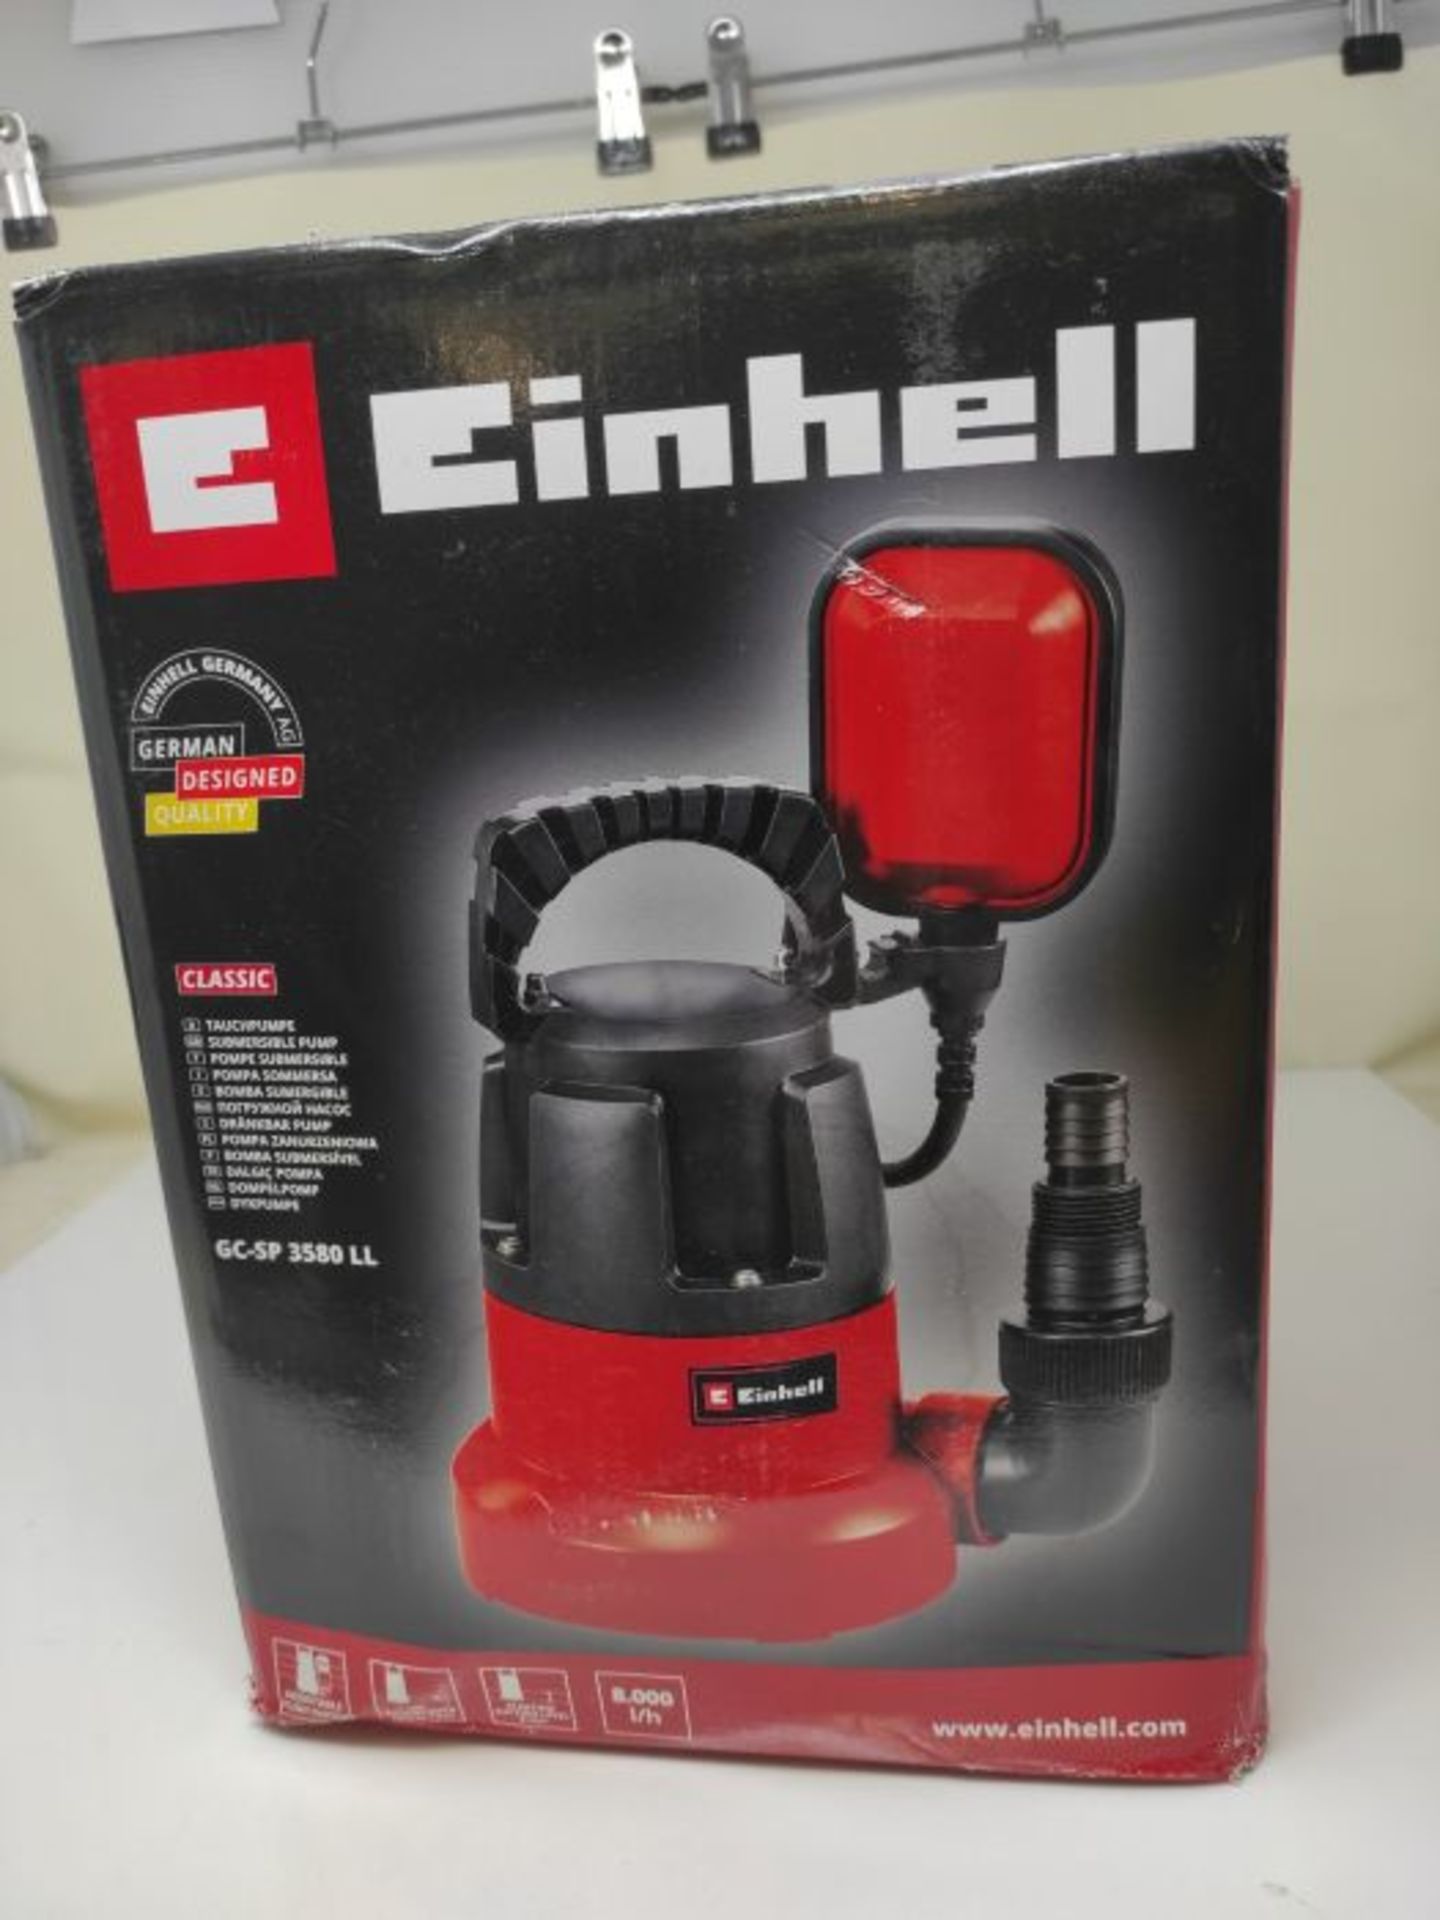 Einhell Submersible Pump GC-SP 3580 LL (350 W, 8000 L/H Extraction Down to 1 mm, Pump - Image 2 of 3